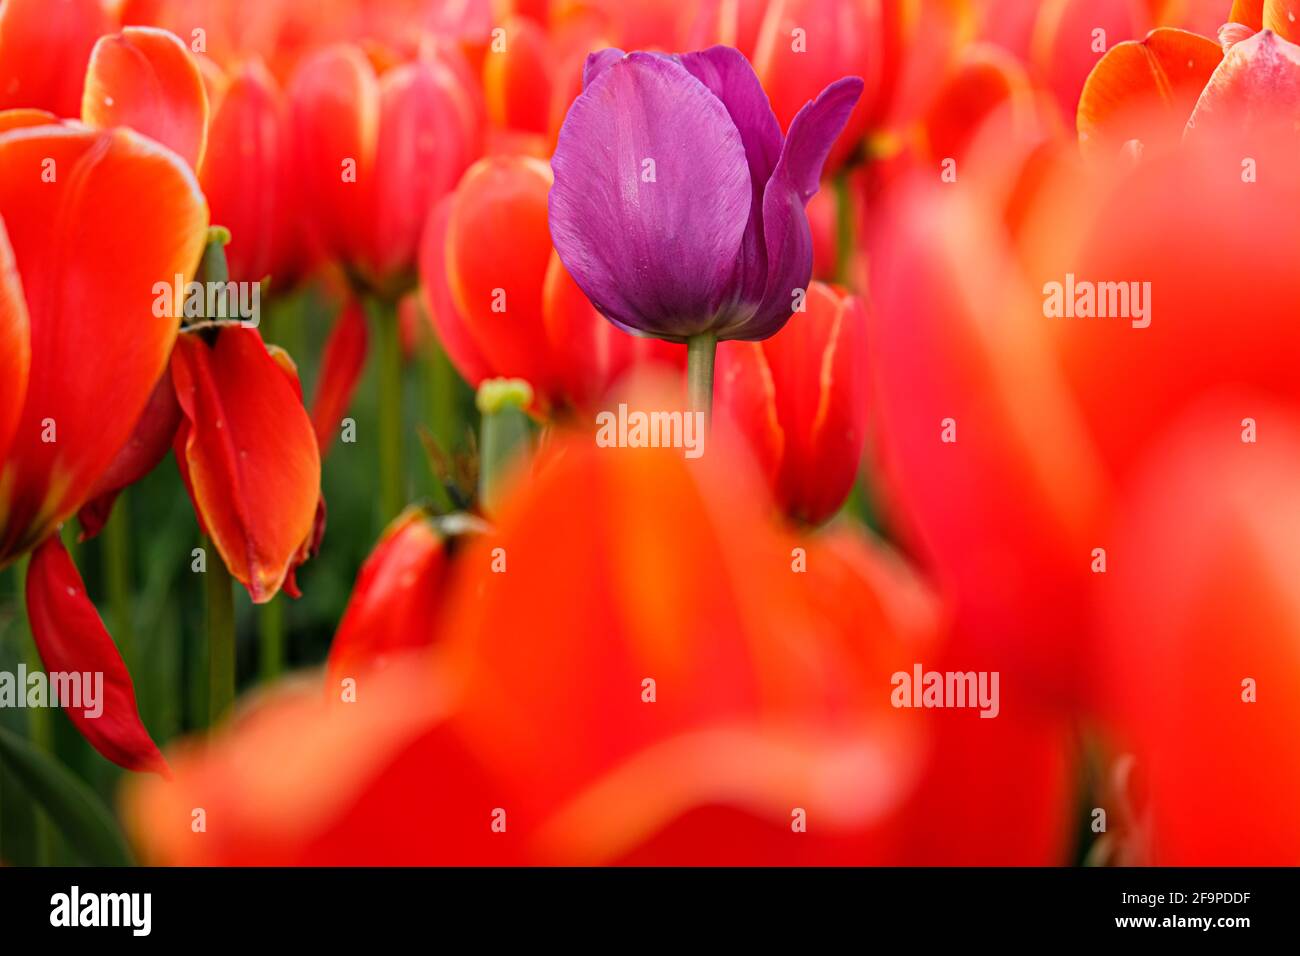 Purple tulip in a field surrounded by red tulips Stock Photo